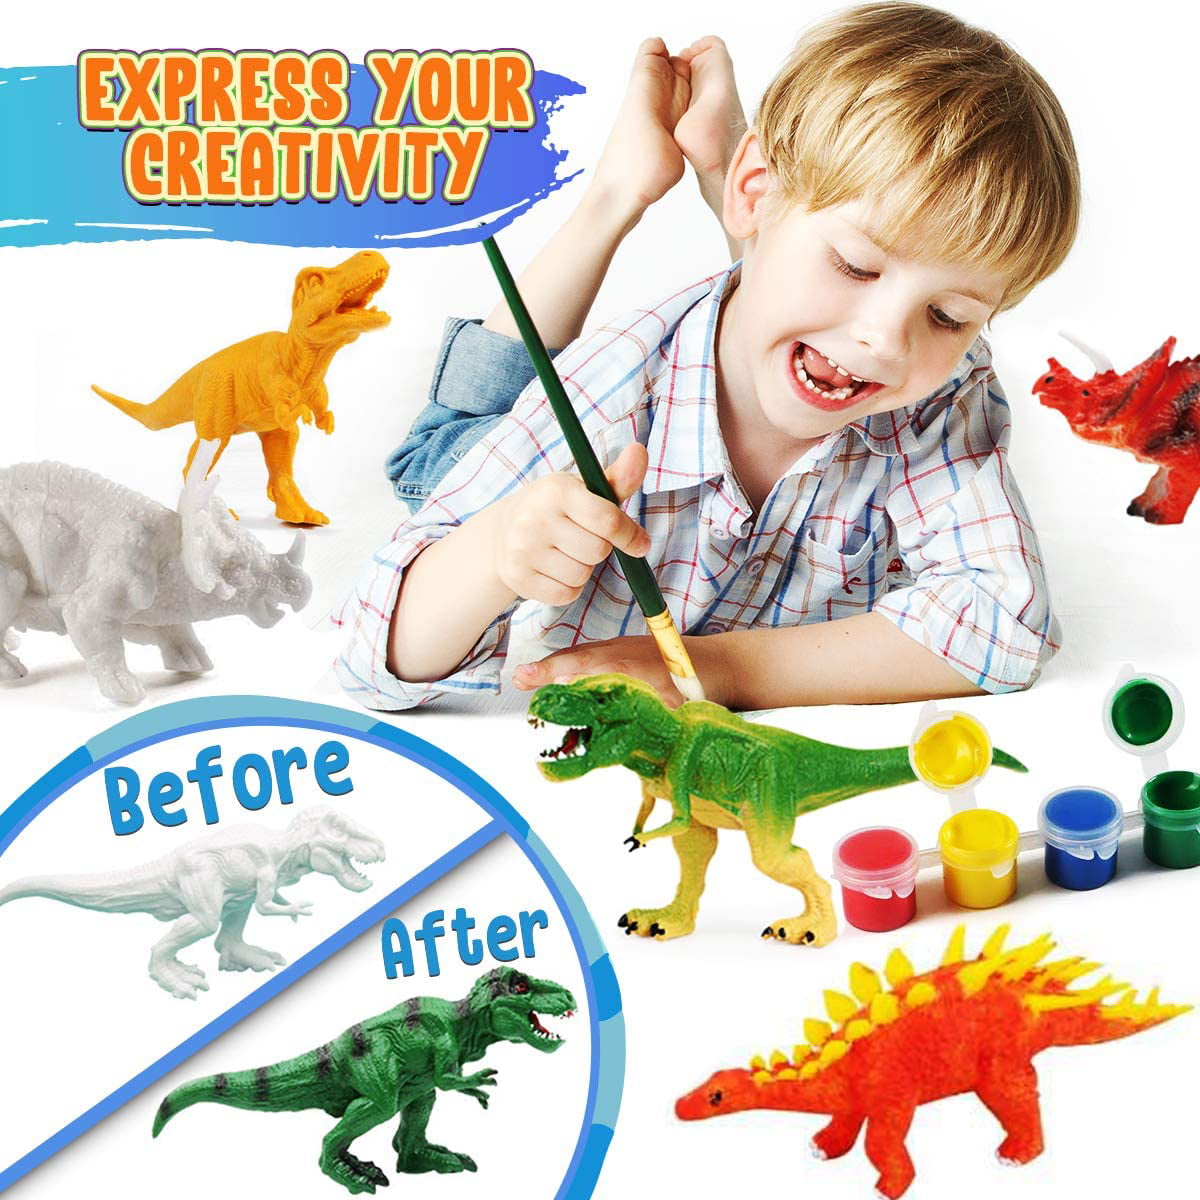 TICE Painting Dinosaurs for Kids DIY Dinosaur Arts Crafts Gift for Boys Girls Kids